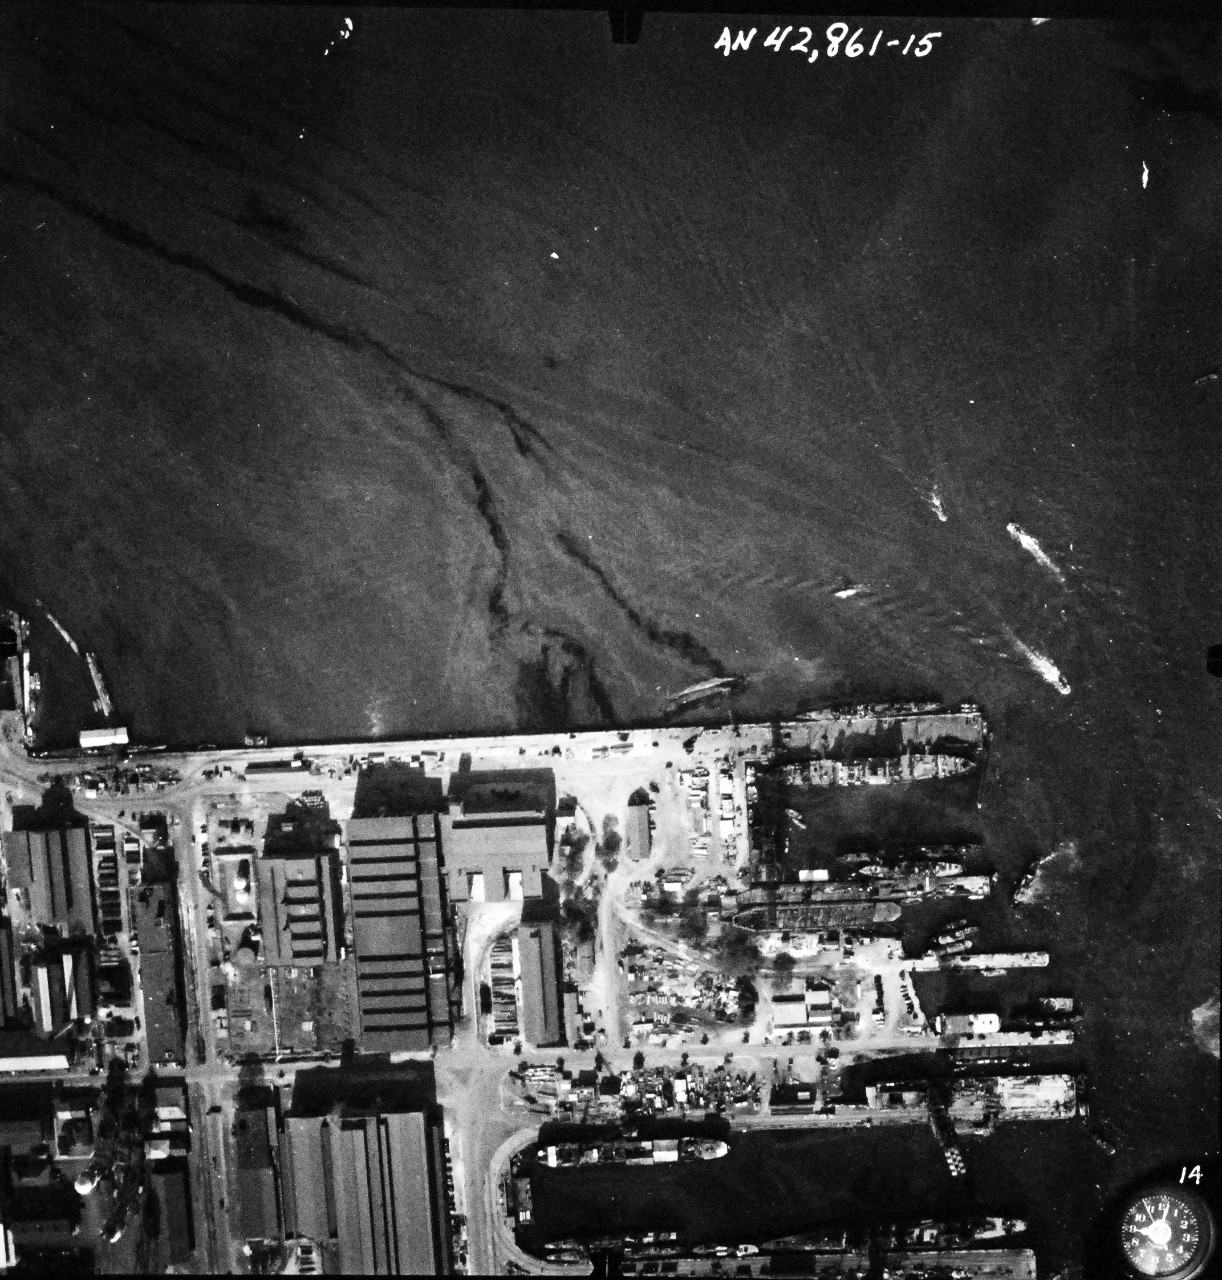 80-G-387577:  Pearl Harbor Attack, 7 December 1941.  Aerial view of "Battleship Row" moorings on the southern side of Ford Island, 10 December 1941, showing damage from the Japanese raid three days earlier.  Ships shown are, (right to left):  USS Pennsylvania (BB 38); USS Cassin (DD 372); USS Downes (DD 375); USS Helena (CL 50) and USS Shaw (DD 373).  Note dark oil streaks on the harbor surface, originating from the sunken battleships. Photographed by VJ-1 at an altitude of 3,000 feet and released November 9, 1950.  U.S. Navy photograph, now in the collections of the National Archives.     (9/22/2015).